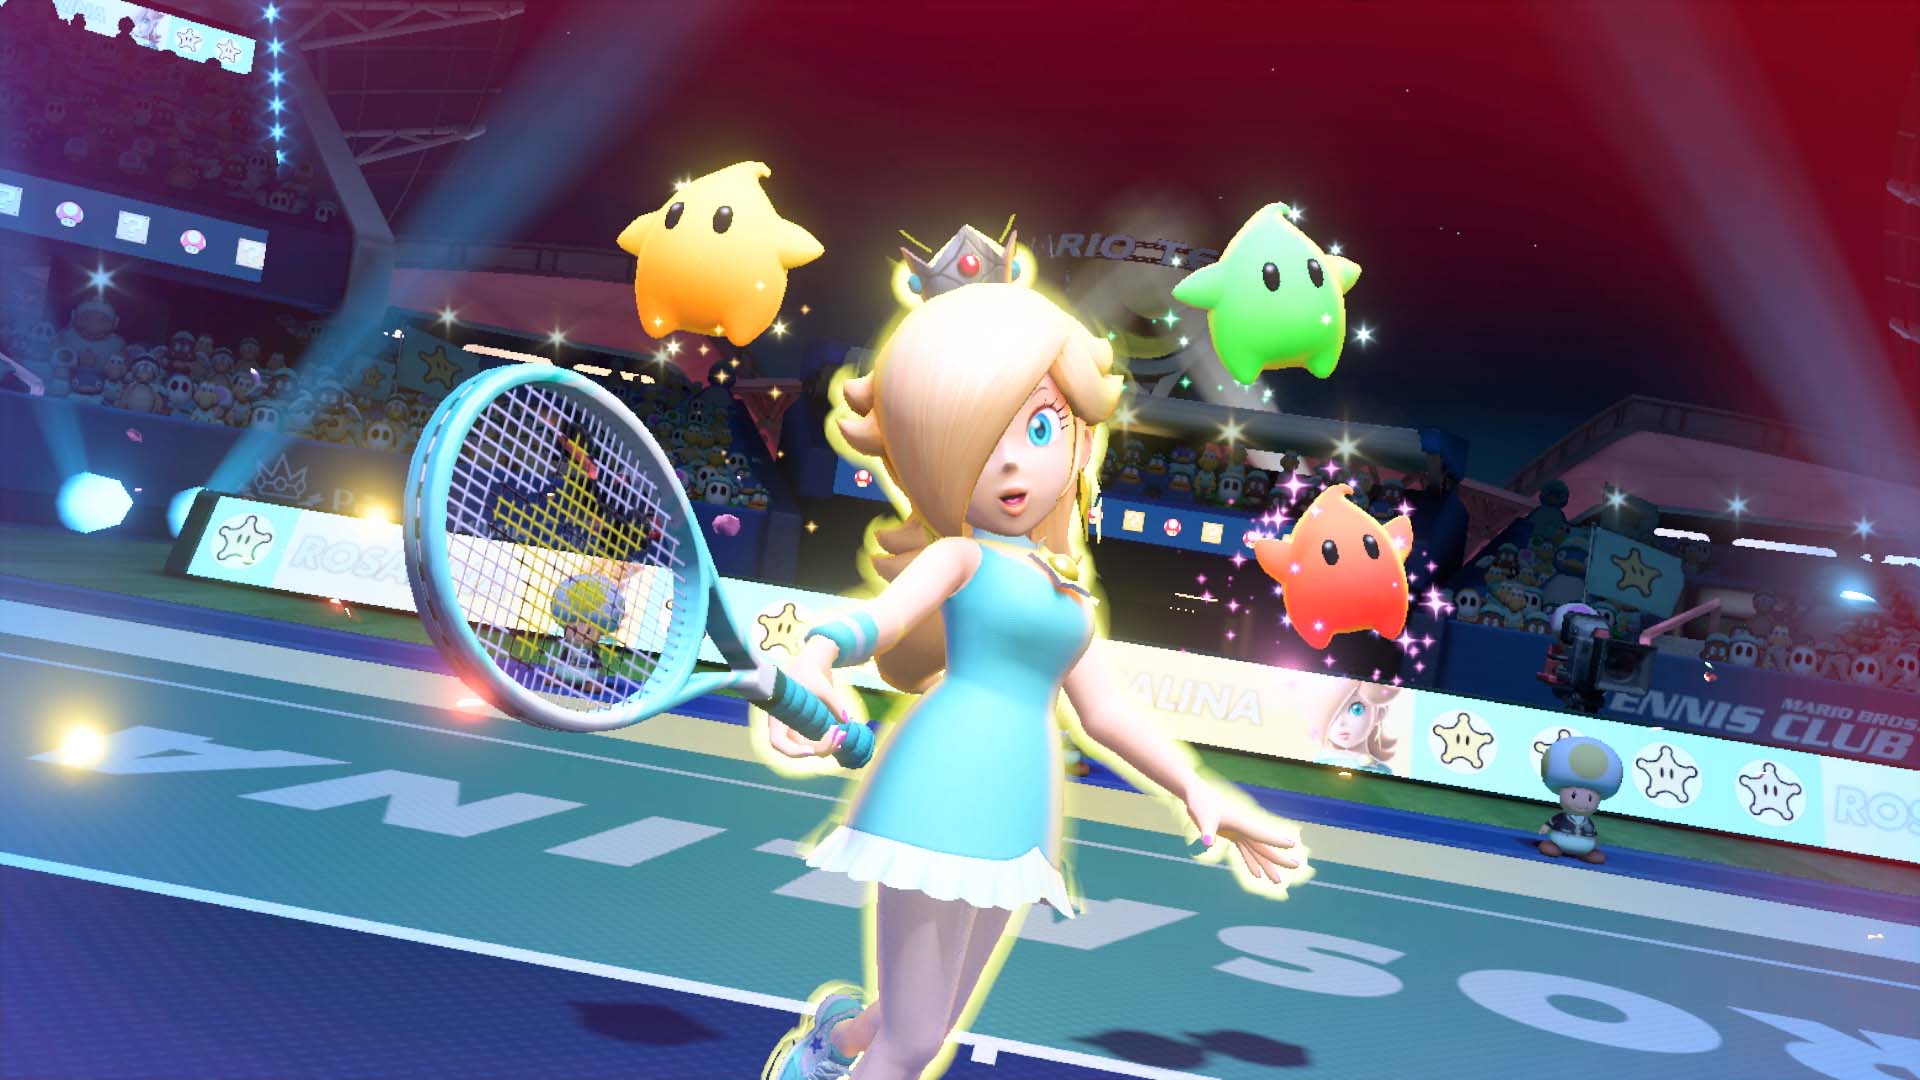 Video Game Mario Tennis Aces HD Wallpaper | Background Image